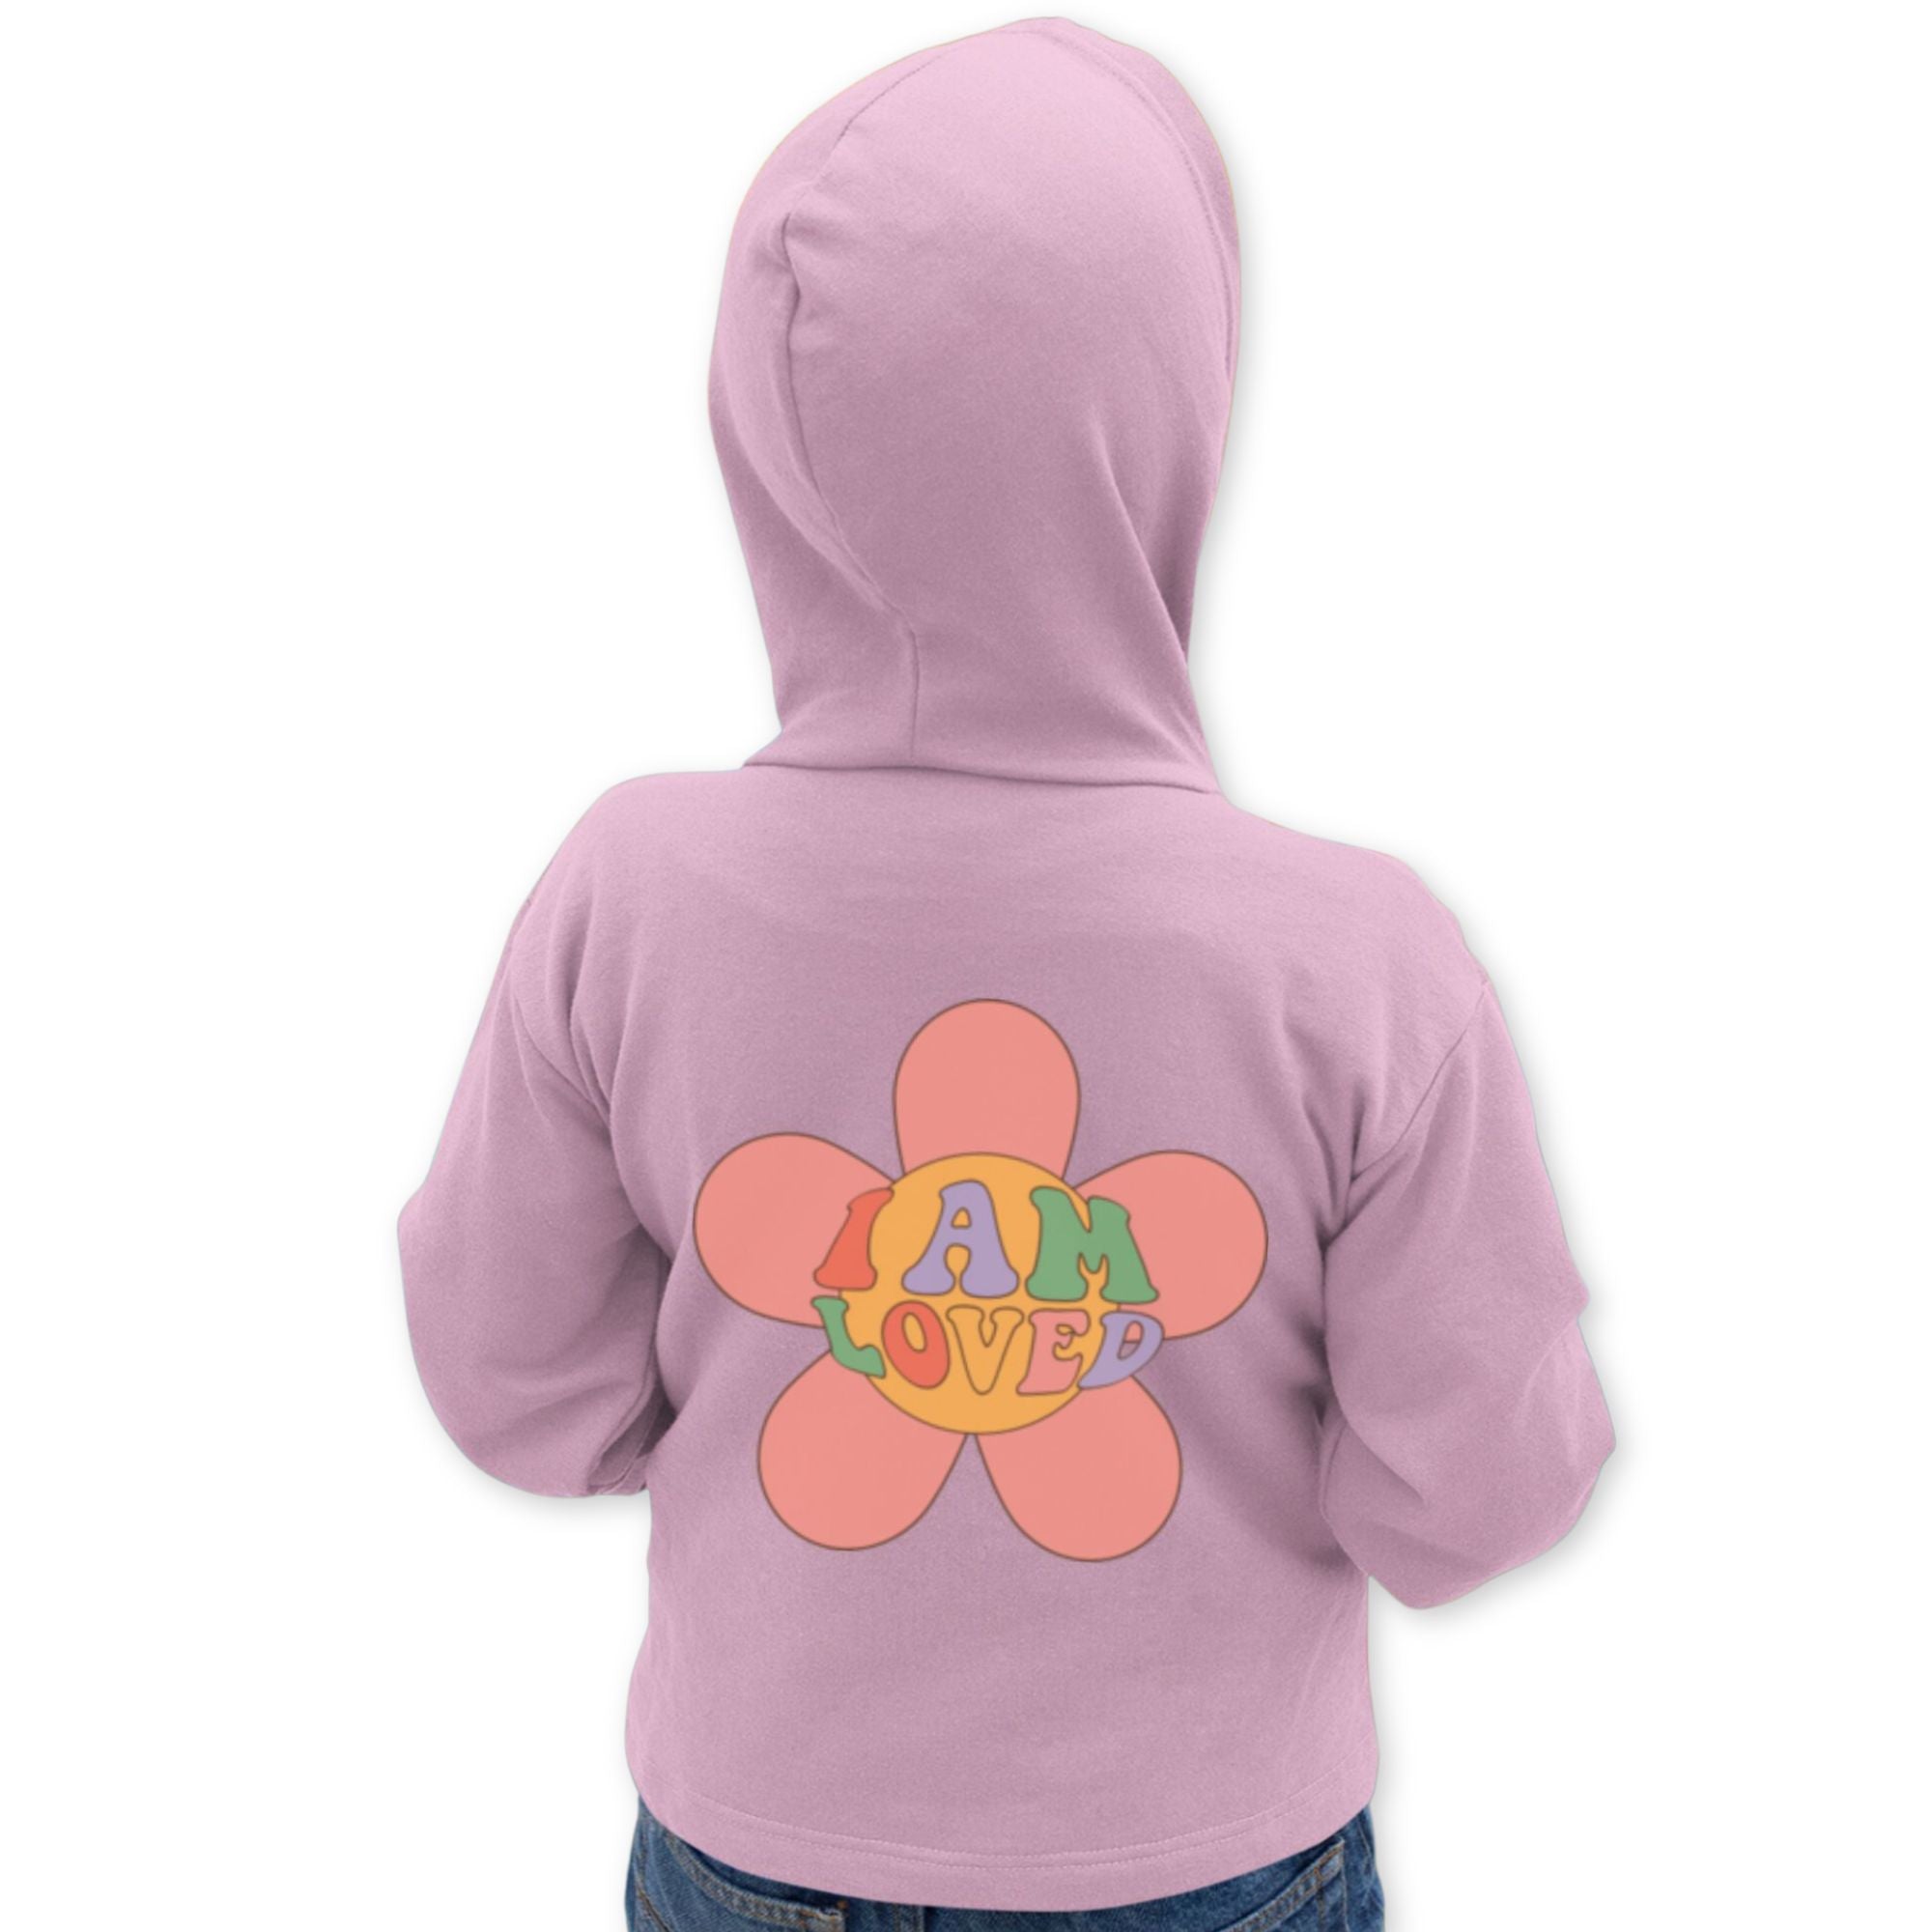 I Am Loved Toddler Jacket Full-Zip Fleece Hoodie Size: 2T Color: Heather Jesus Passion Apparel